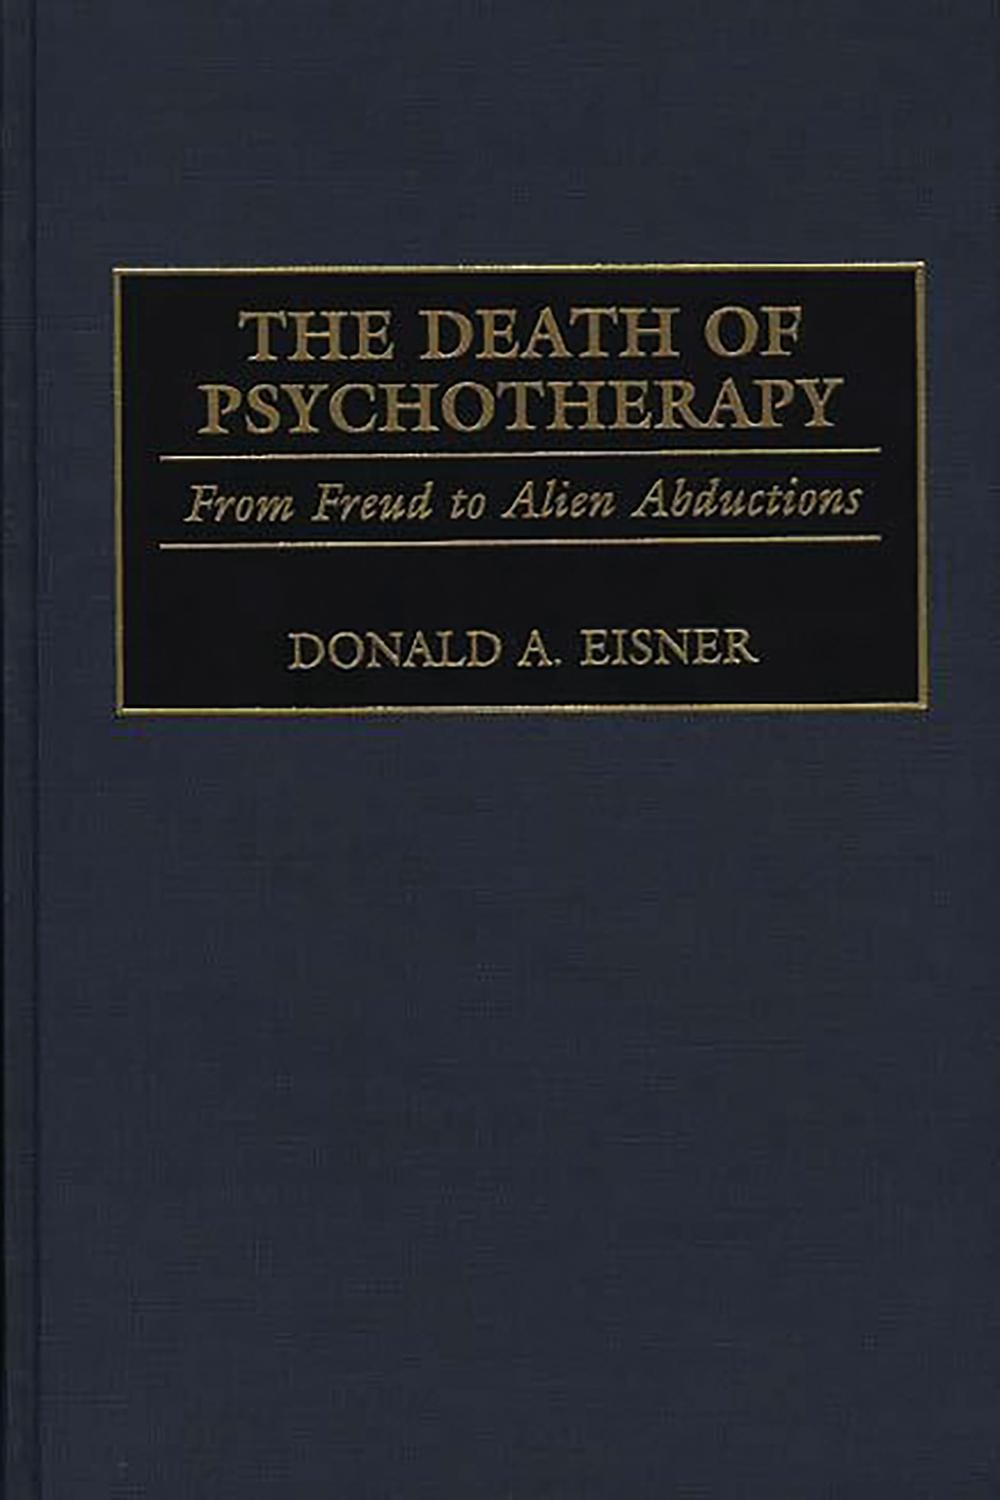 The Death of Psychotherapy - Donald A. Eisner